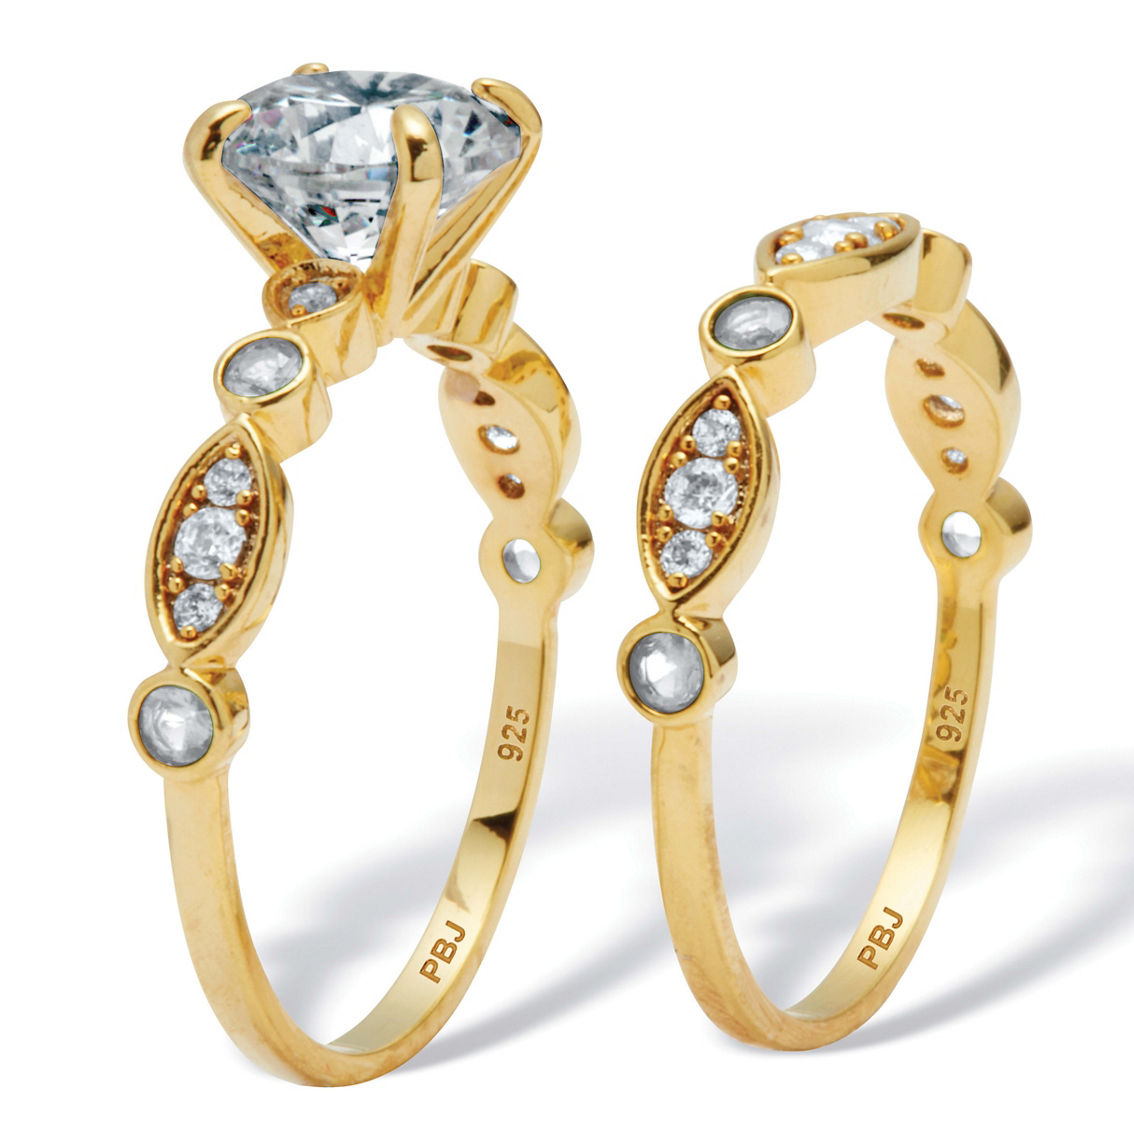 PalmBeach 2.52 TCW Round CZ 14k Gold-Plated Sterling Silver Bridal Ring Set - Image 2 of 5